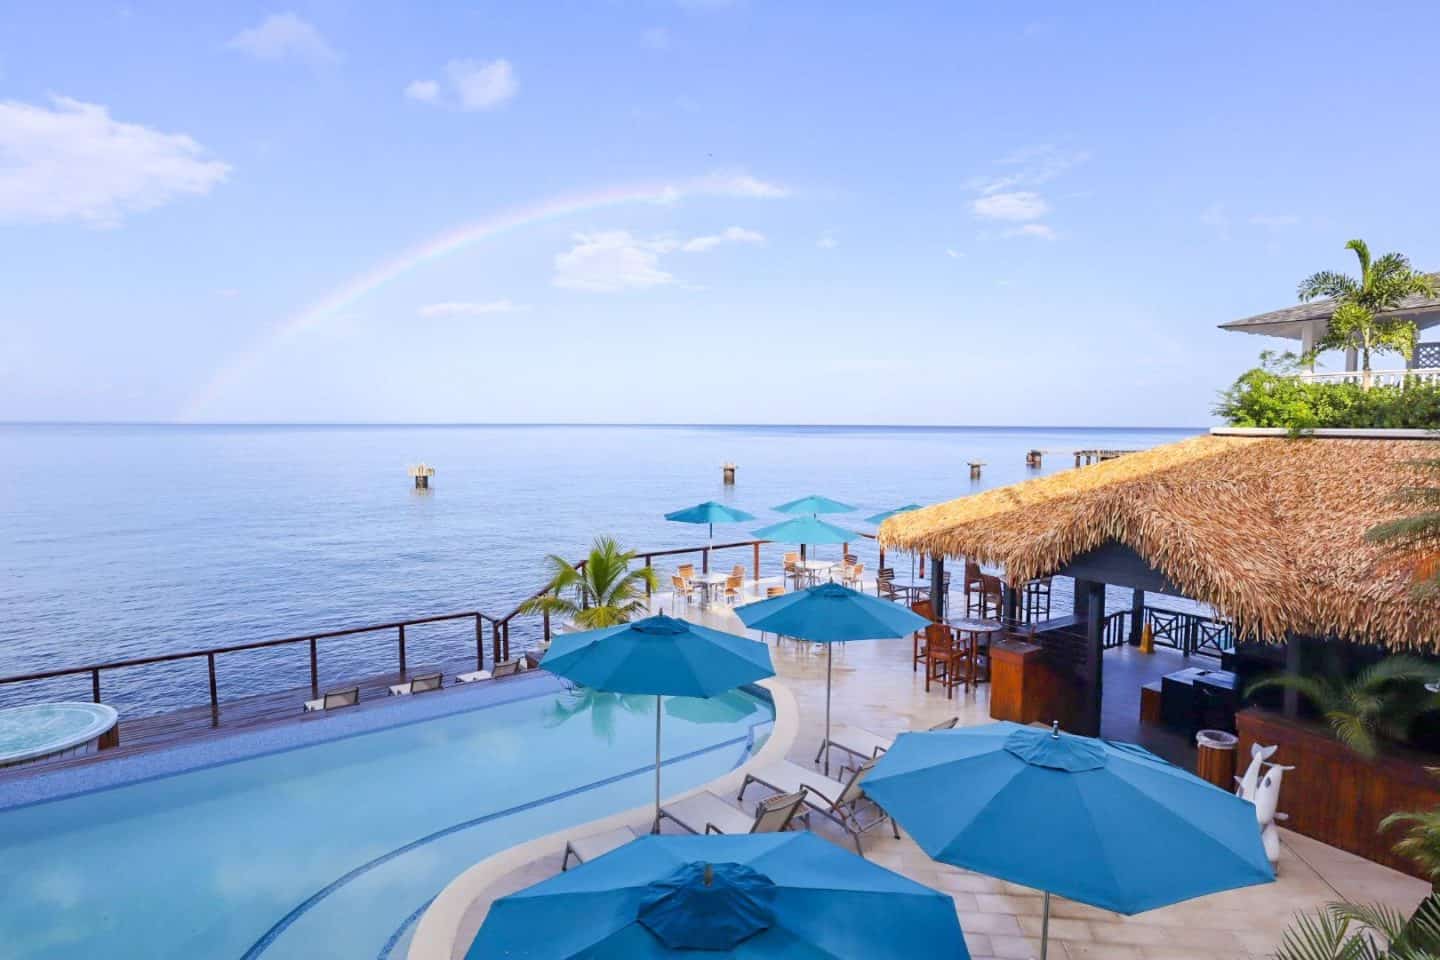 The Wandering Quinn Travel Blog Dominica travel guide, Fort Young Hotel Roseau Dominica Swimming pool and ocean view with rainbow